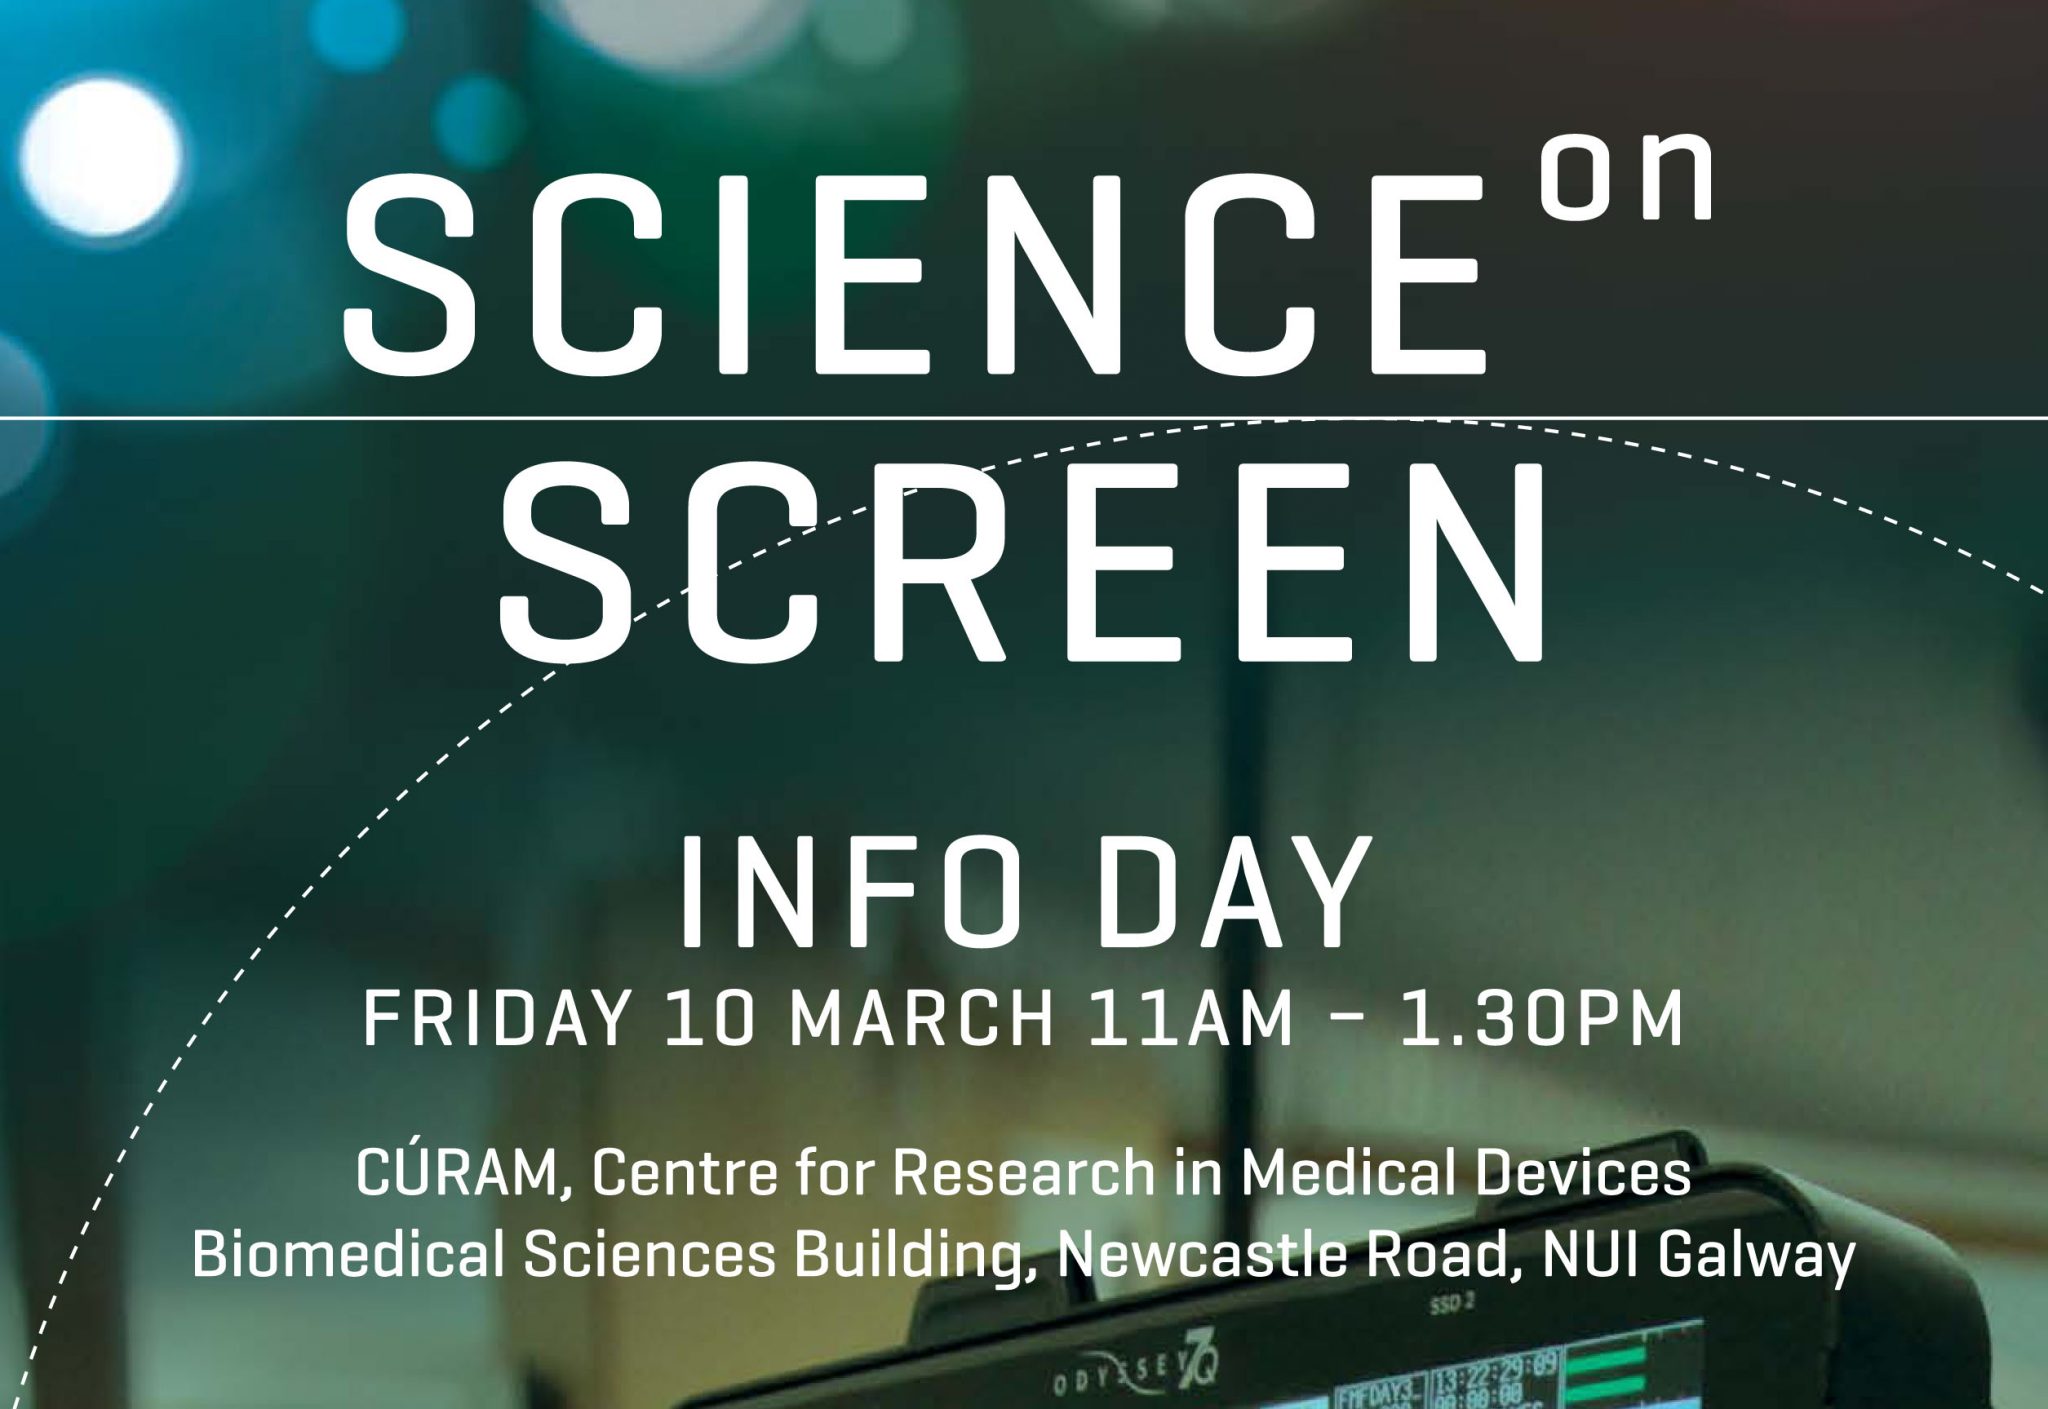 Science on Screen Information Day 2017